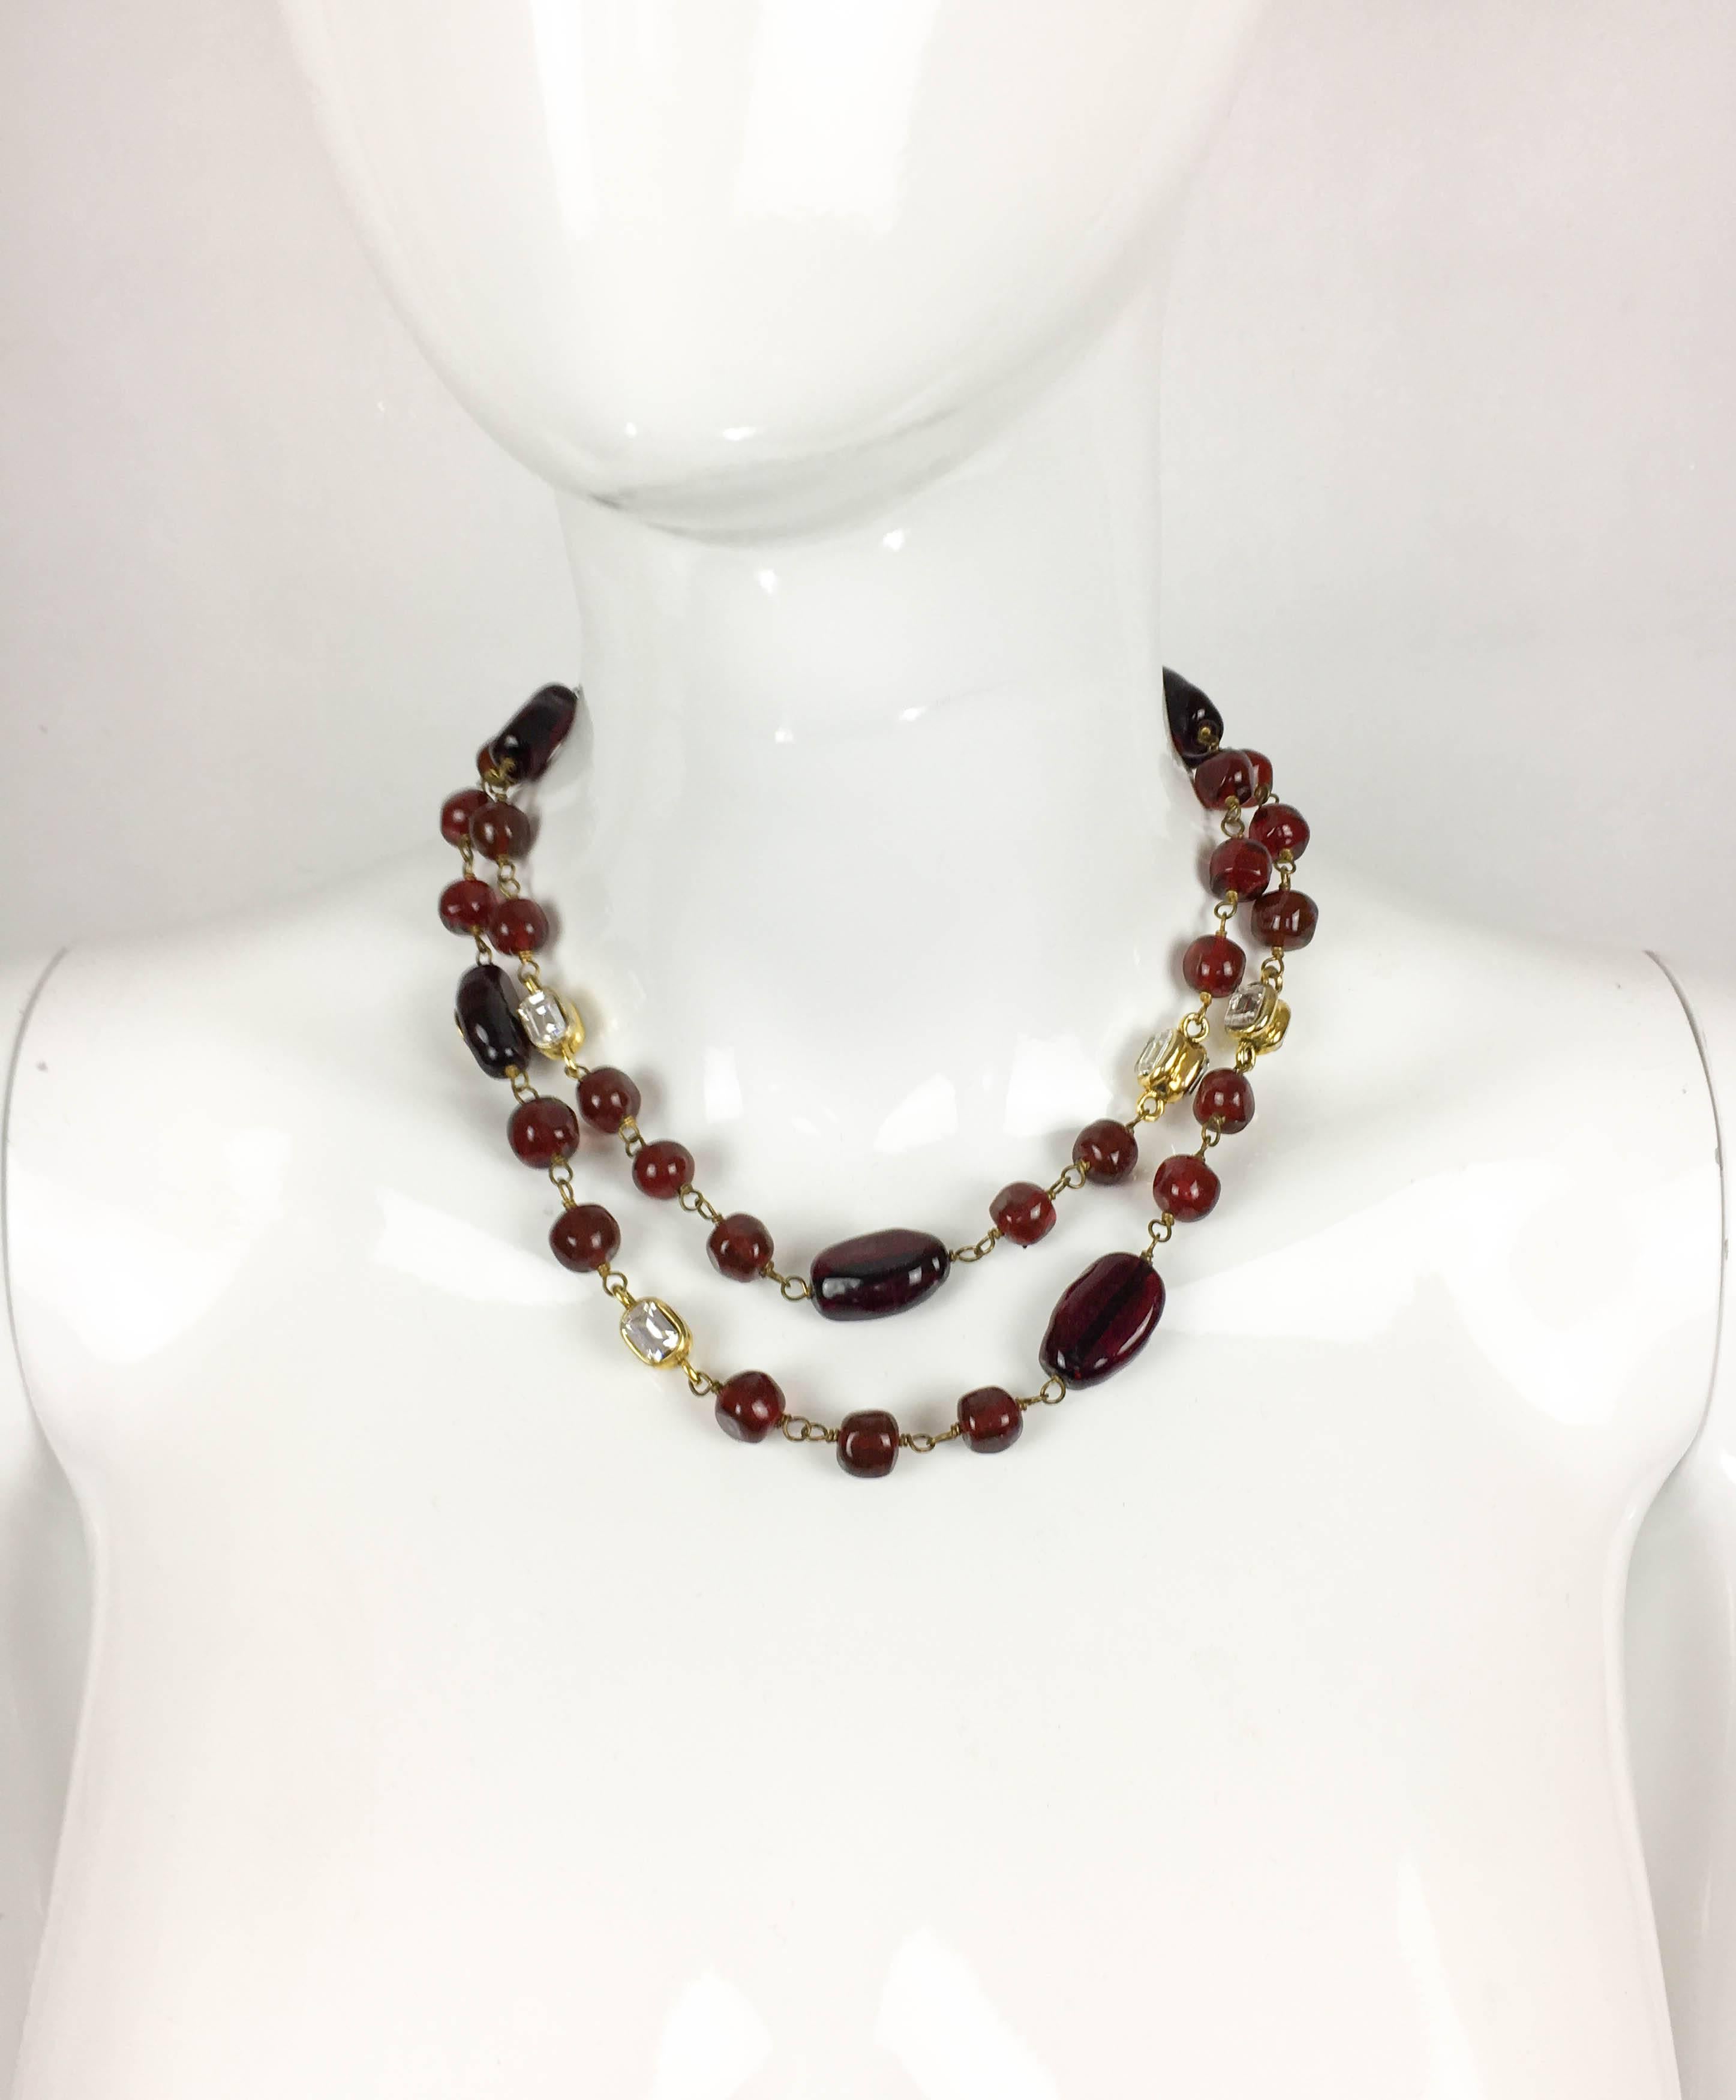 Women's 1970s Chanel Red Gripoix and Rhinestone Long Necklace